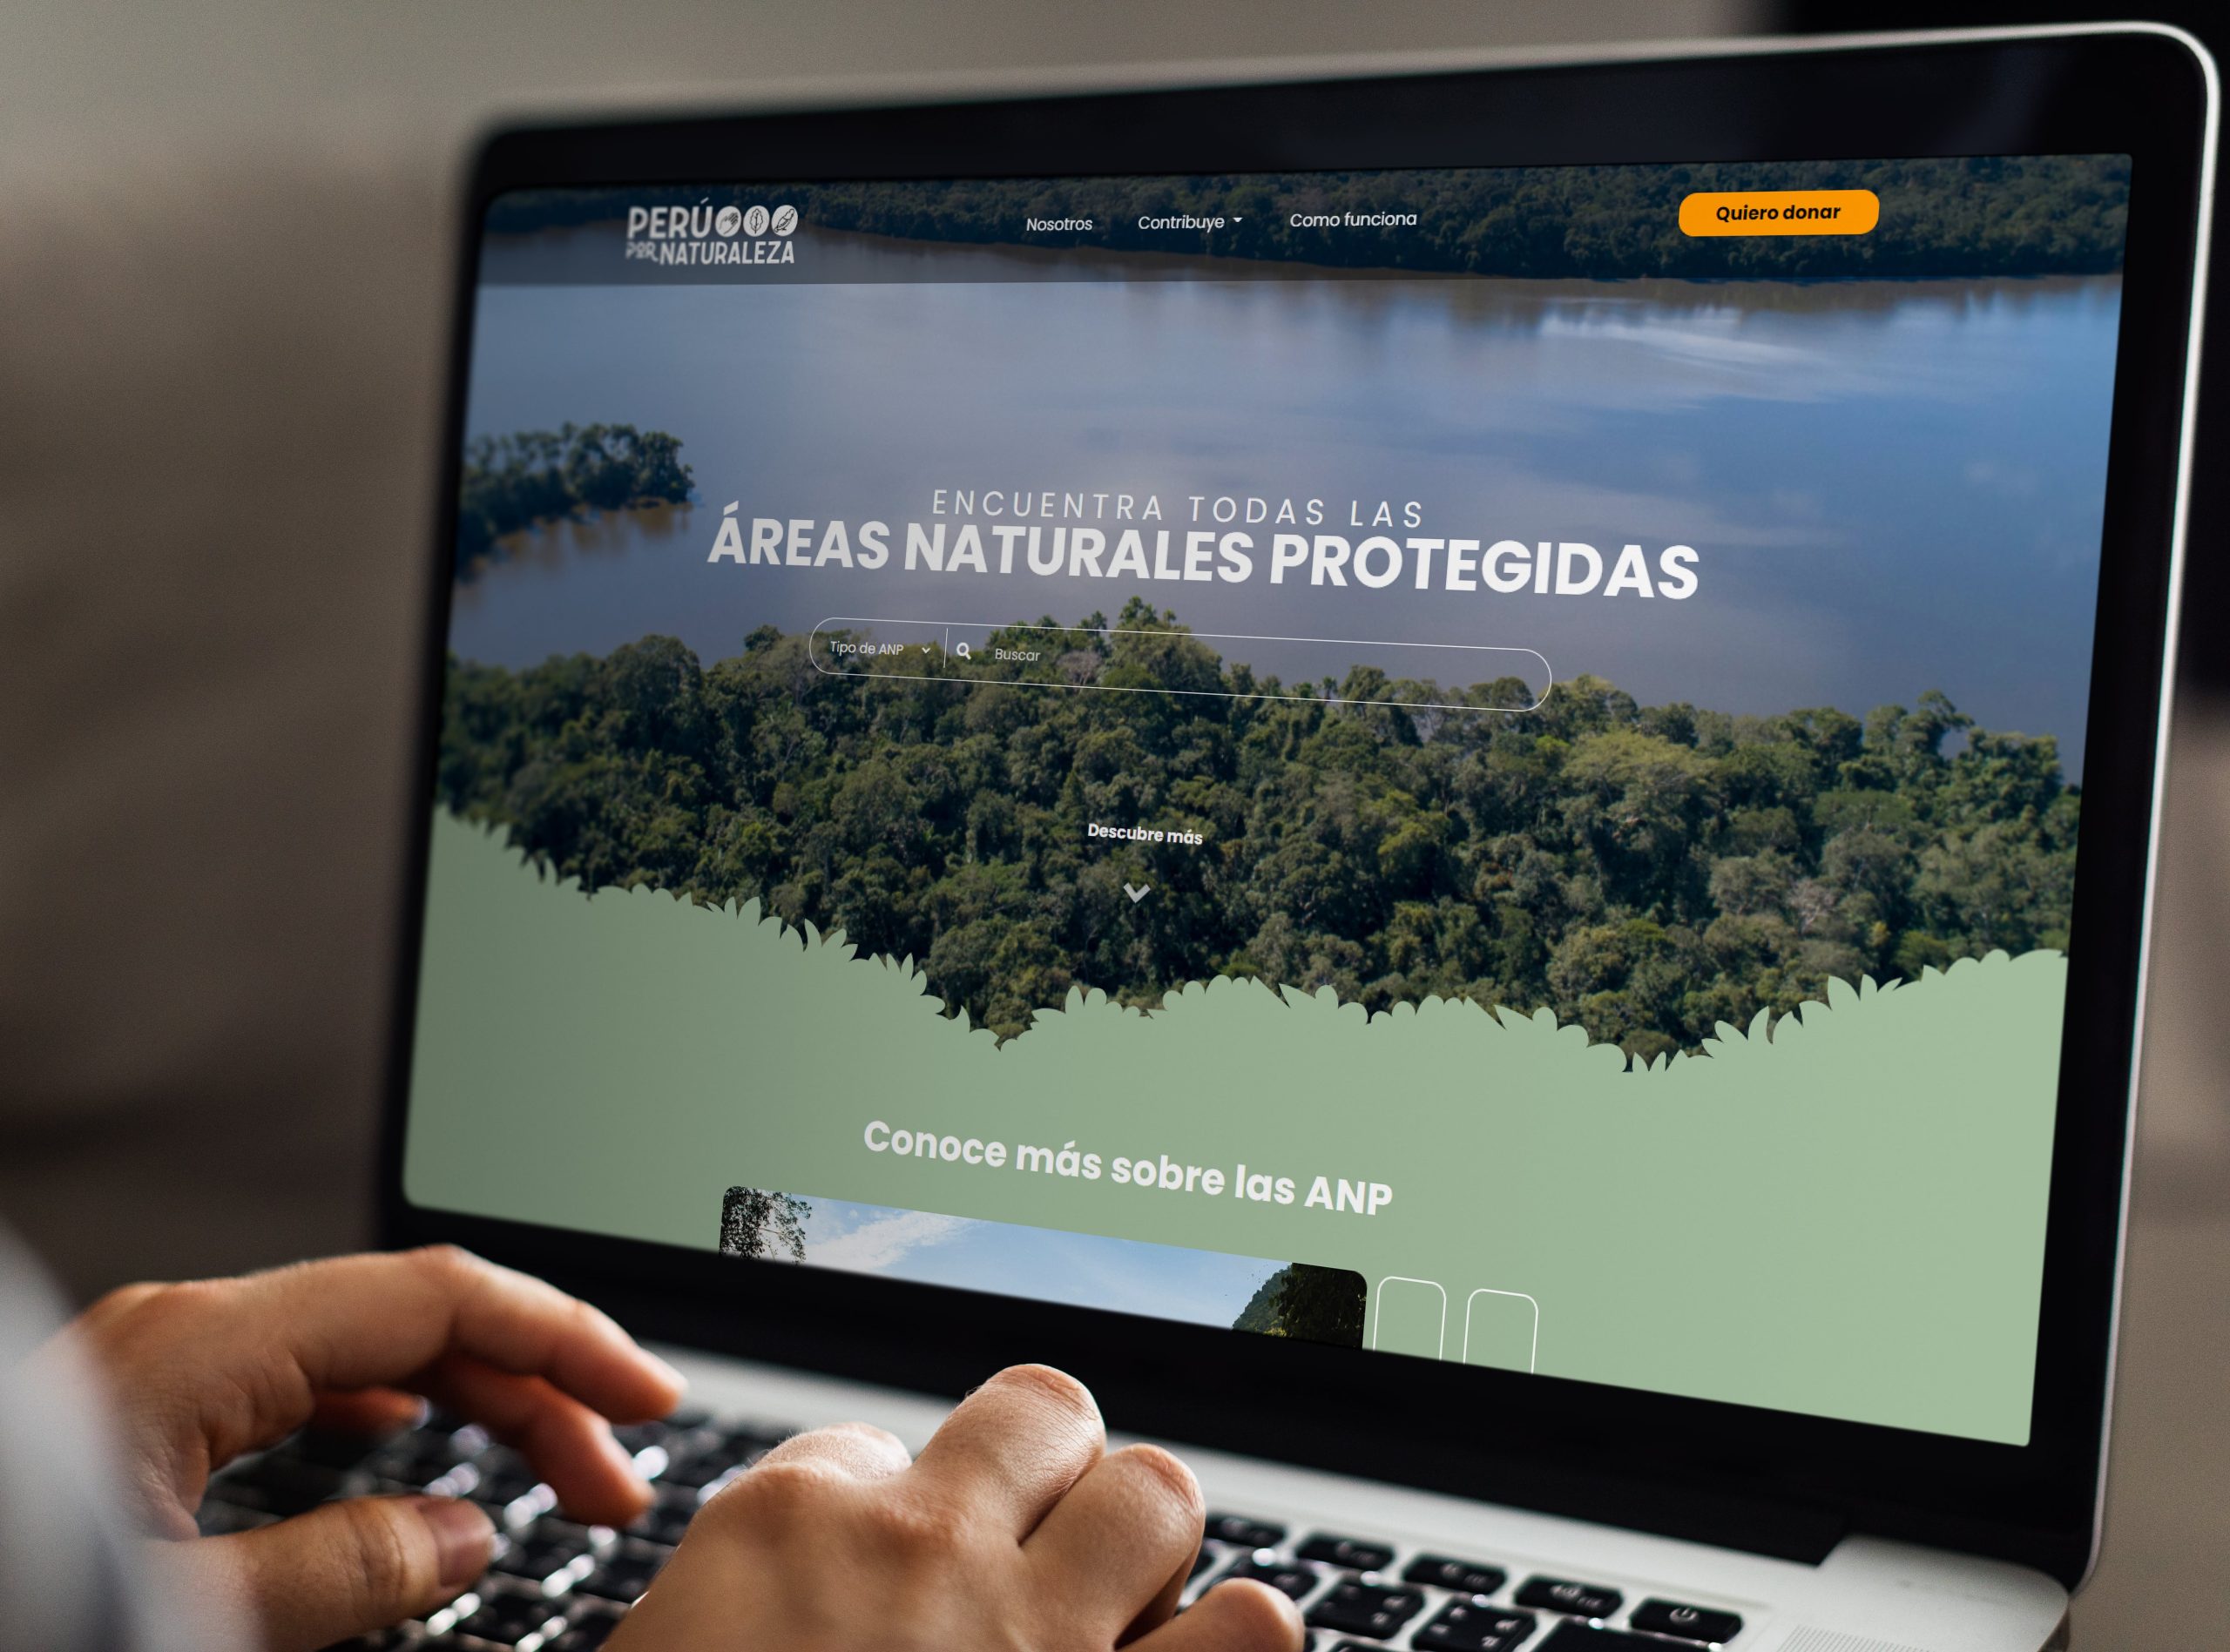 Peru by Nature is a digital community whose purpose is to involve all Peruvians in the conservation of our protected natural areas and the protection of our Amazon.